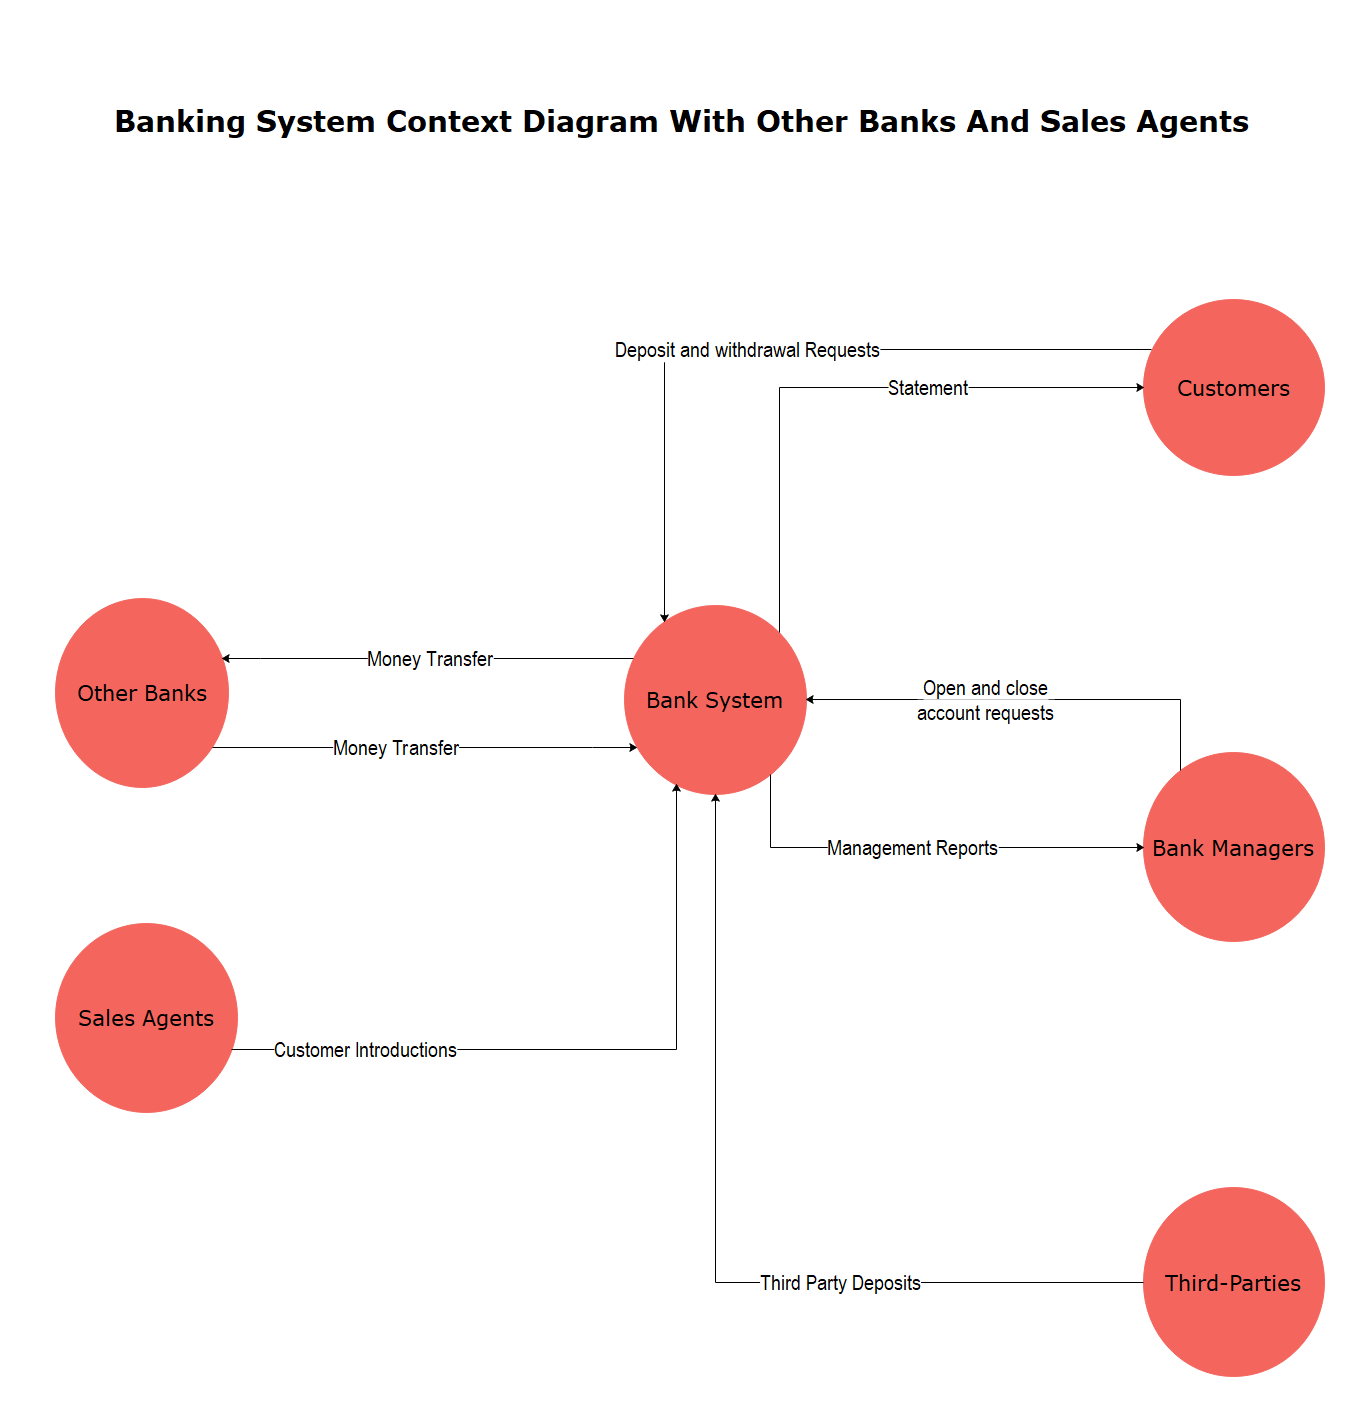 Banking System Context Diagram With Other Banks And Sales Agents